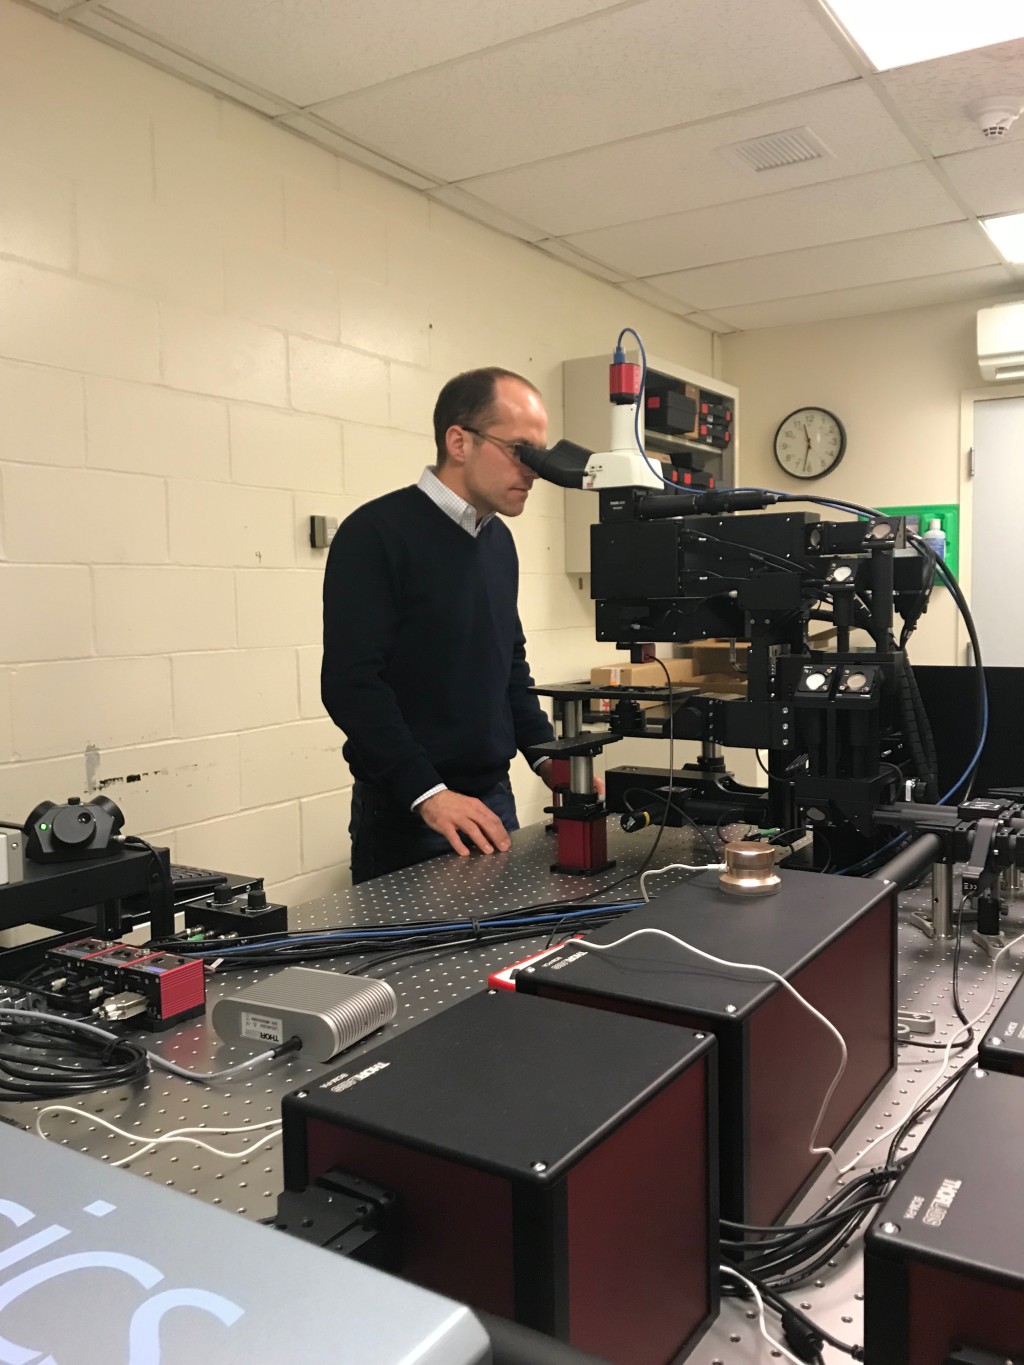 Christoph Straub brings experience using 2-photon microscopy to UNE